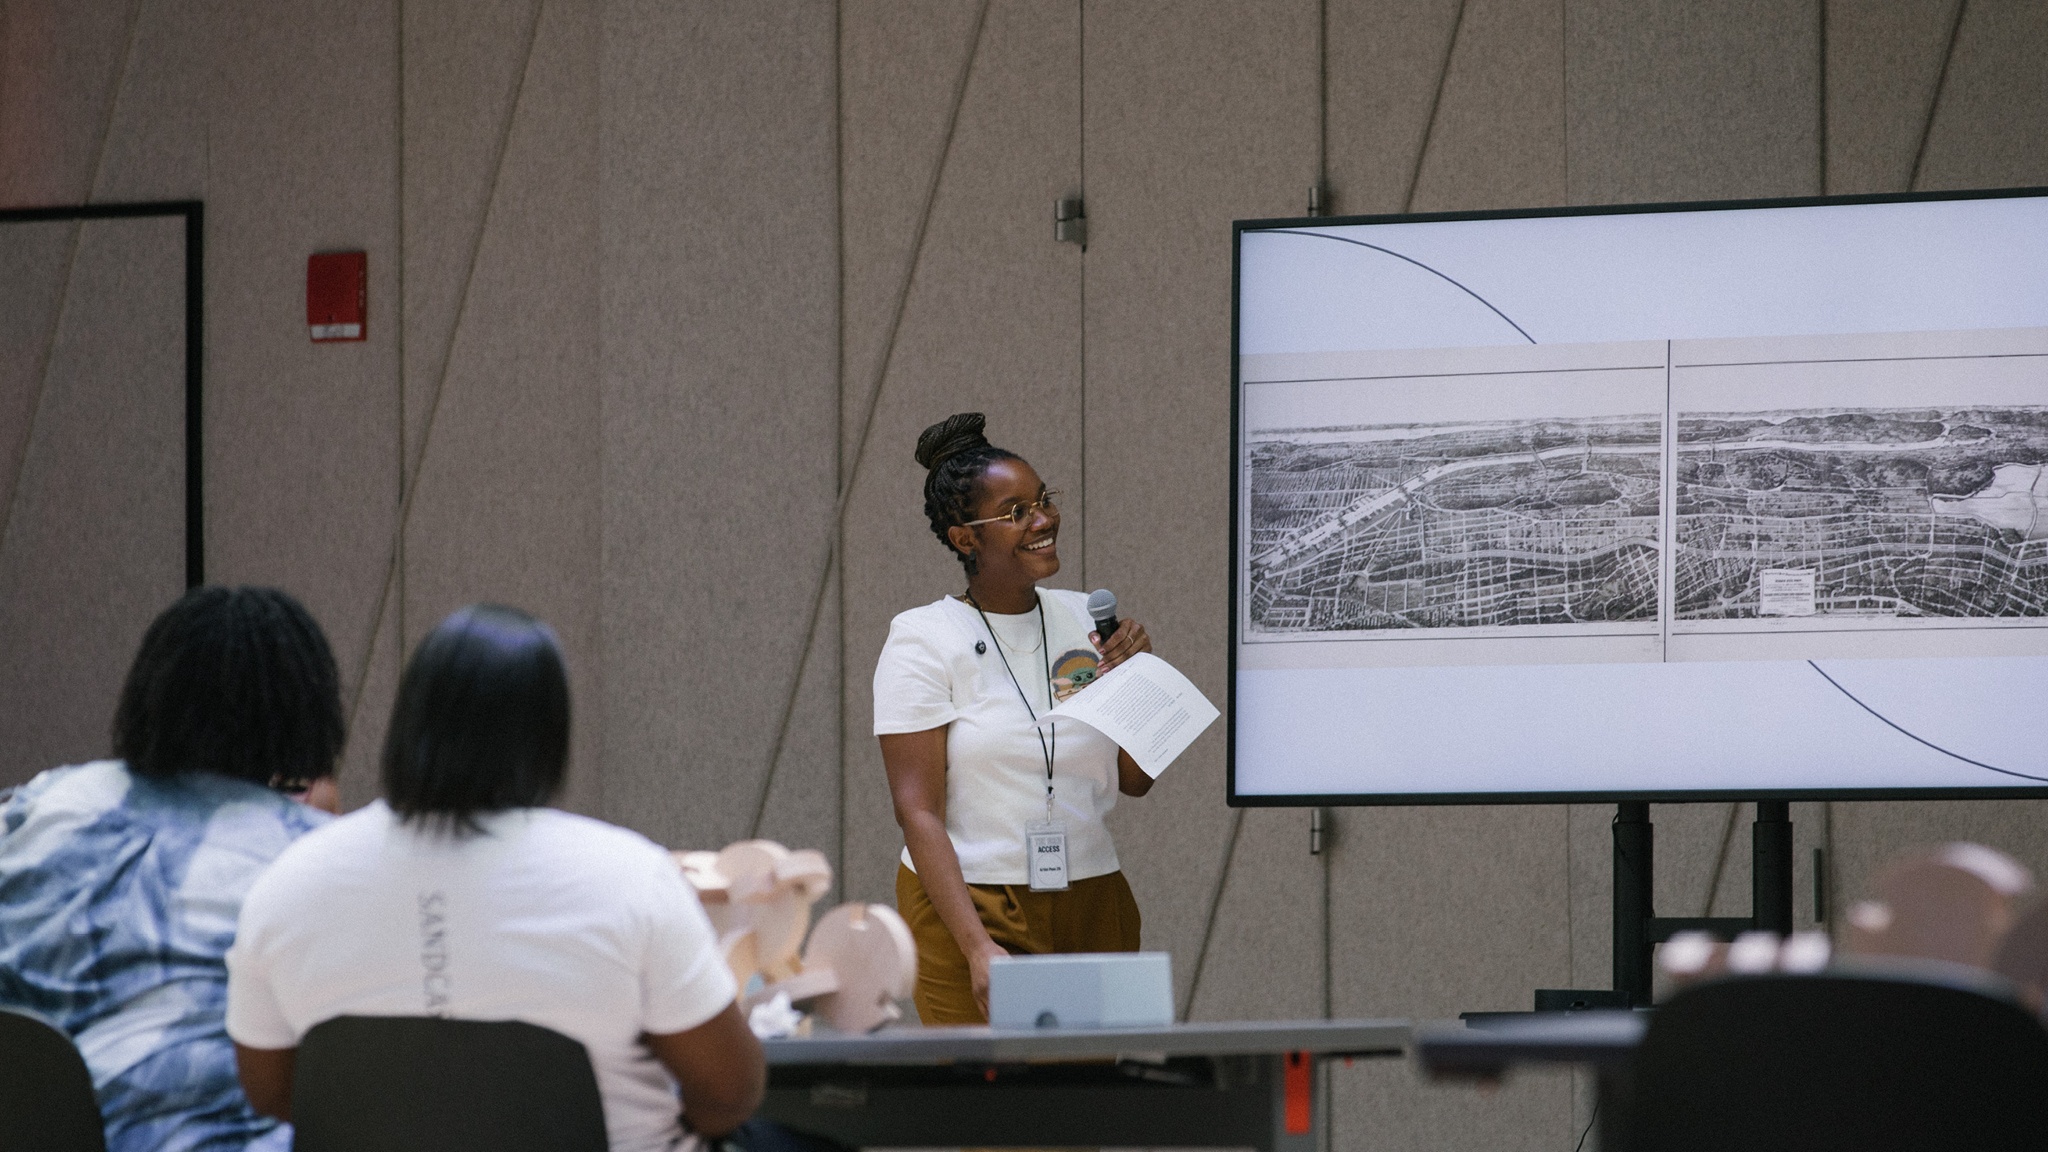 The artist Ladi'Sasha Jones stands beside a video screen in front of an audience seated at tables. On the screen is a 19th century map of Harlem and New York City. 